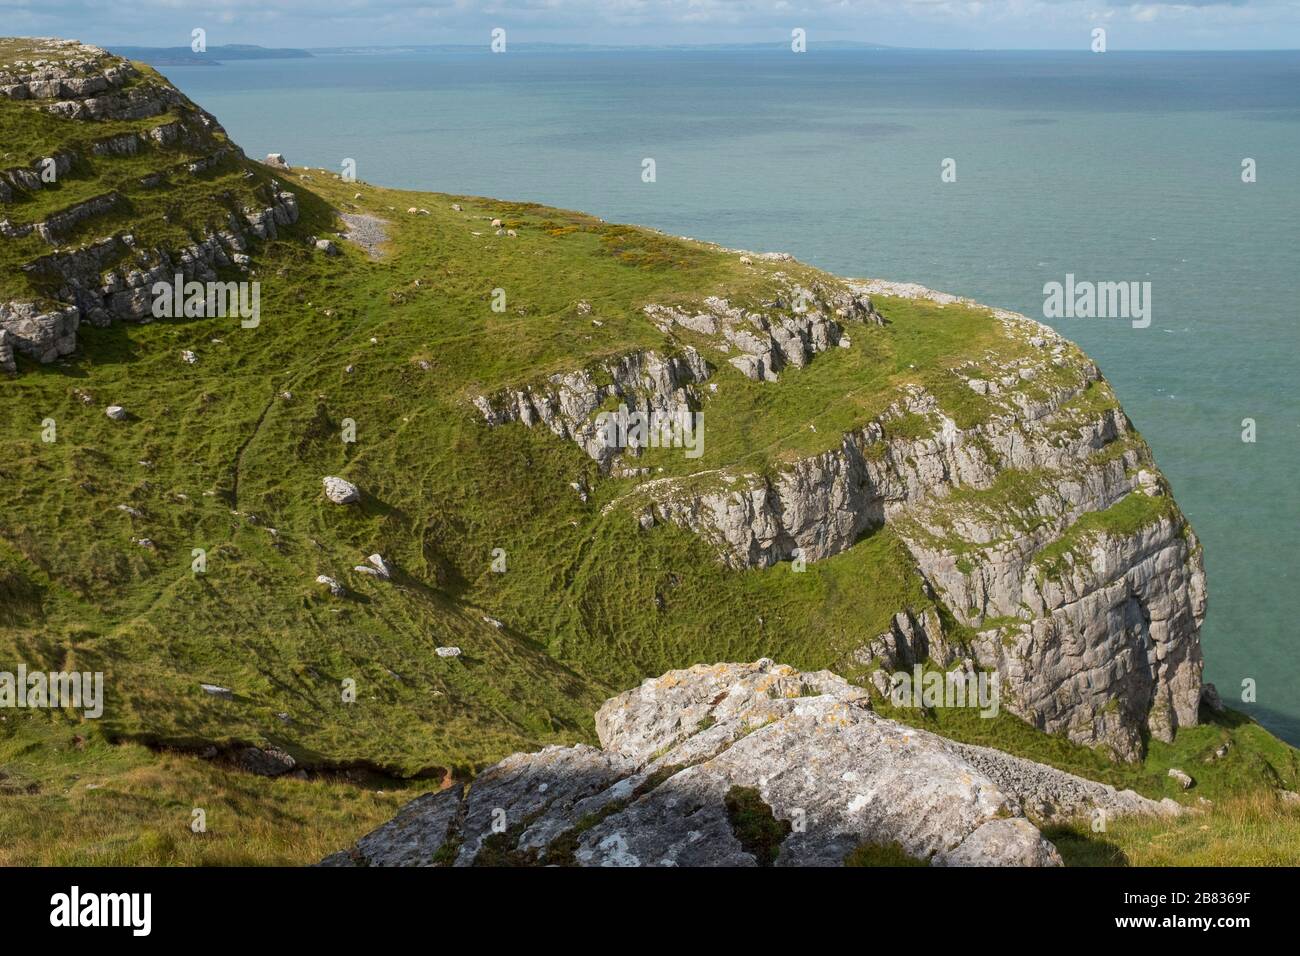 Rock formation beside the sea on the Great Orme, Llandudno, Conwy, Wales, UK Stock Photo